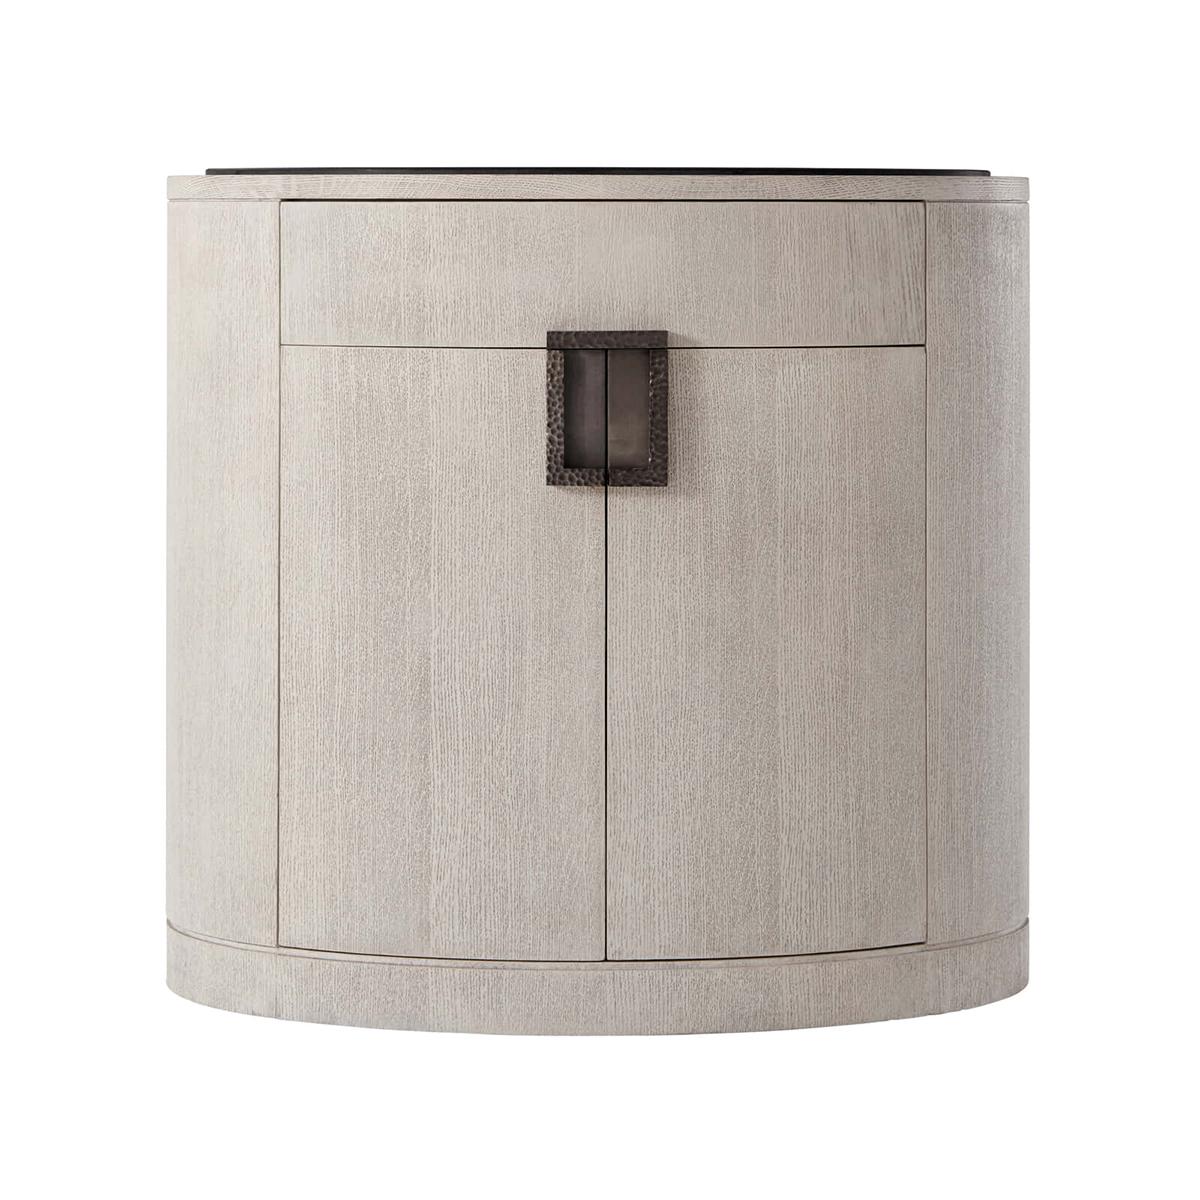 Light oak oval nightstand in a brushed oak gowan finish, the oval basalt inset top, with a hammered metal handle with a matte tungsten finish, a frieze drawers above a two-door cabinet enclosing an adjustable shelf.

Dimensions: 30